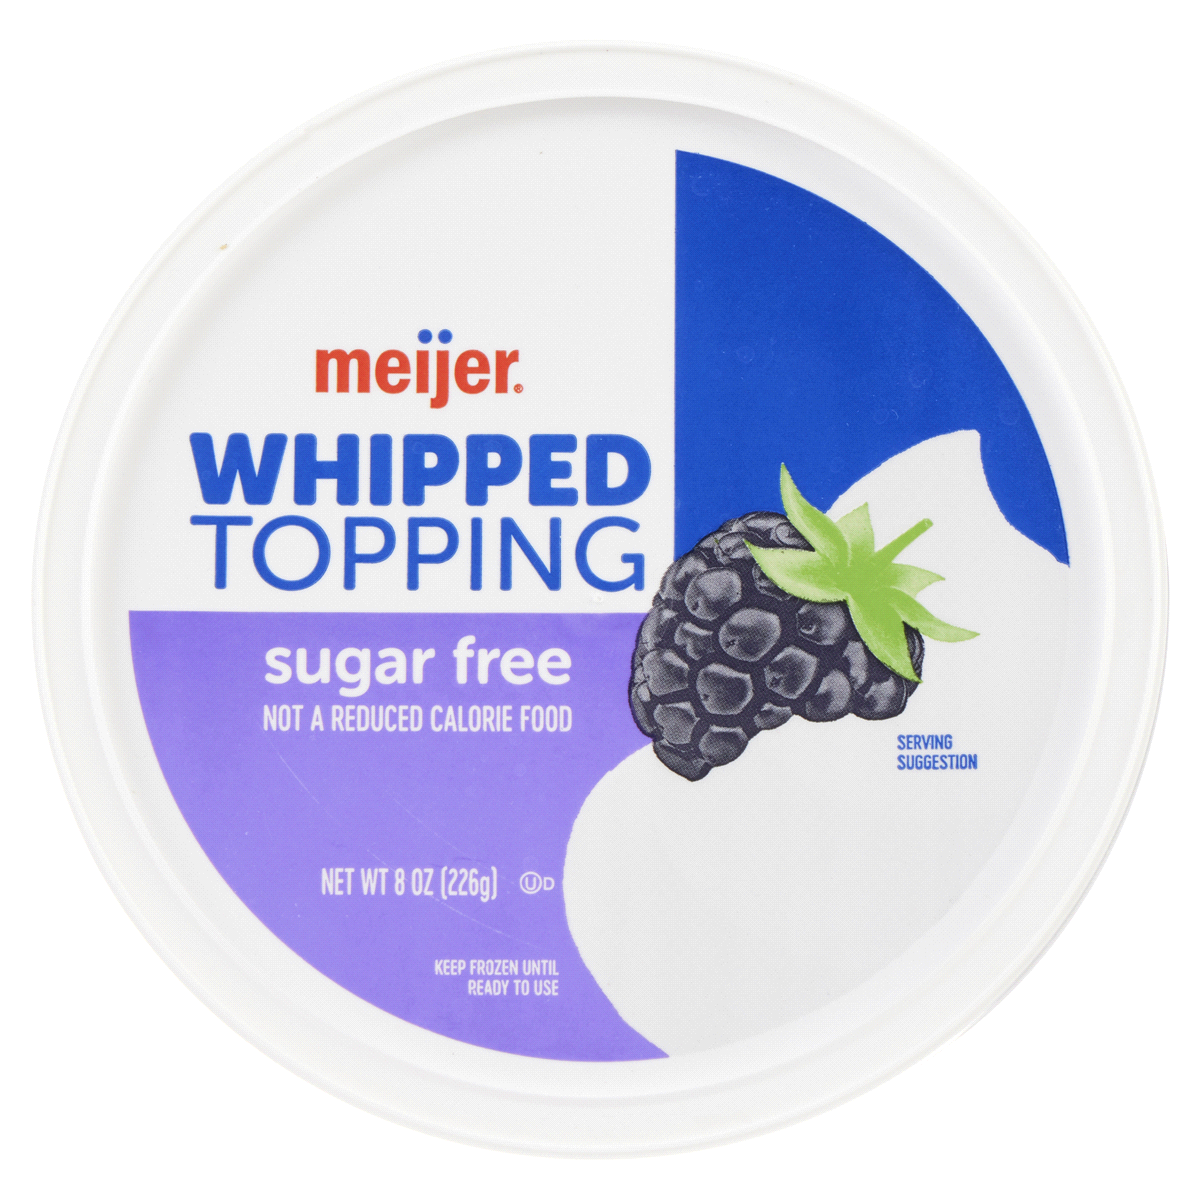 slide 5 of 17, MEIJER WHIPPED TOPPING SUGAR FREE, 8 oz